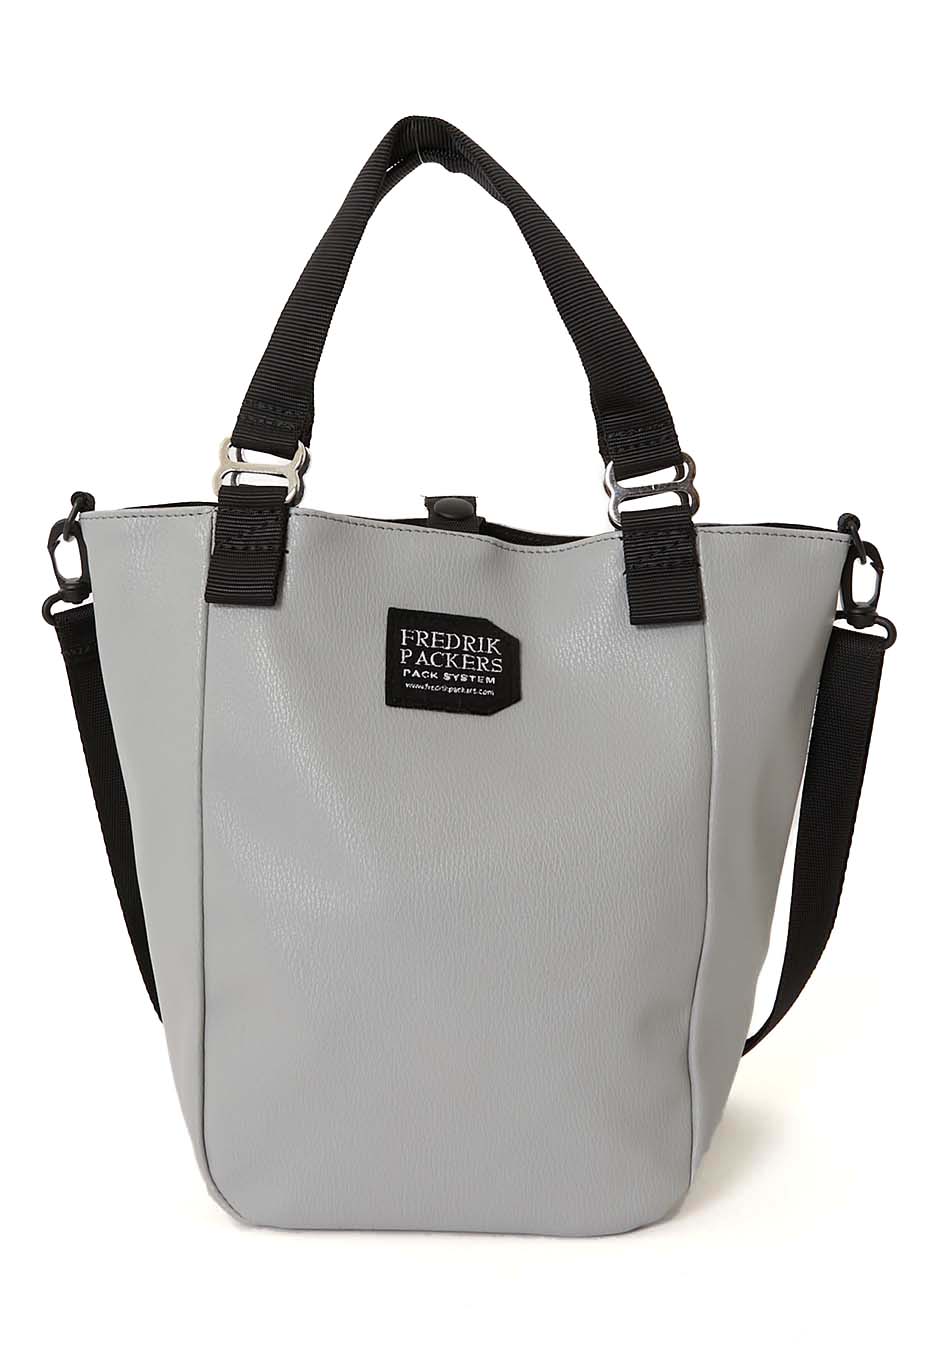 FREDRIK PACKERS Eco Leather Mission Tote Bag XS